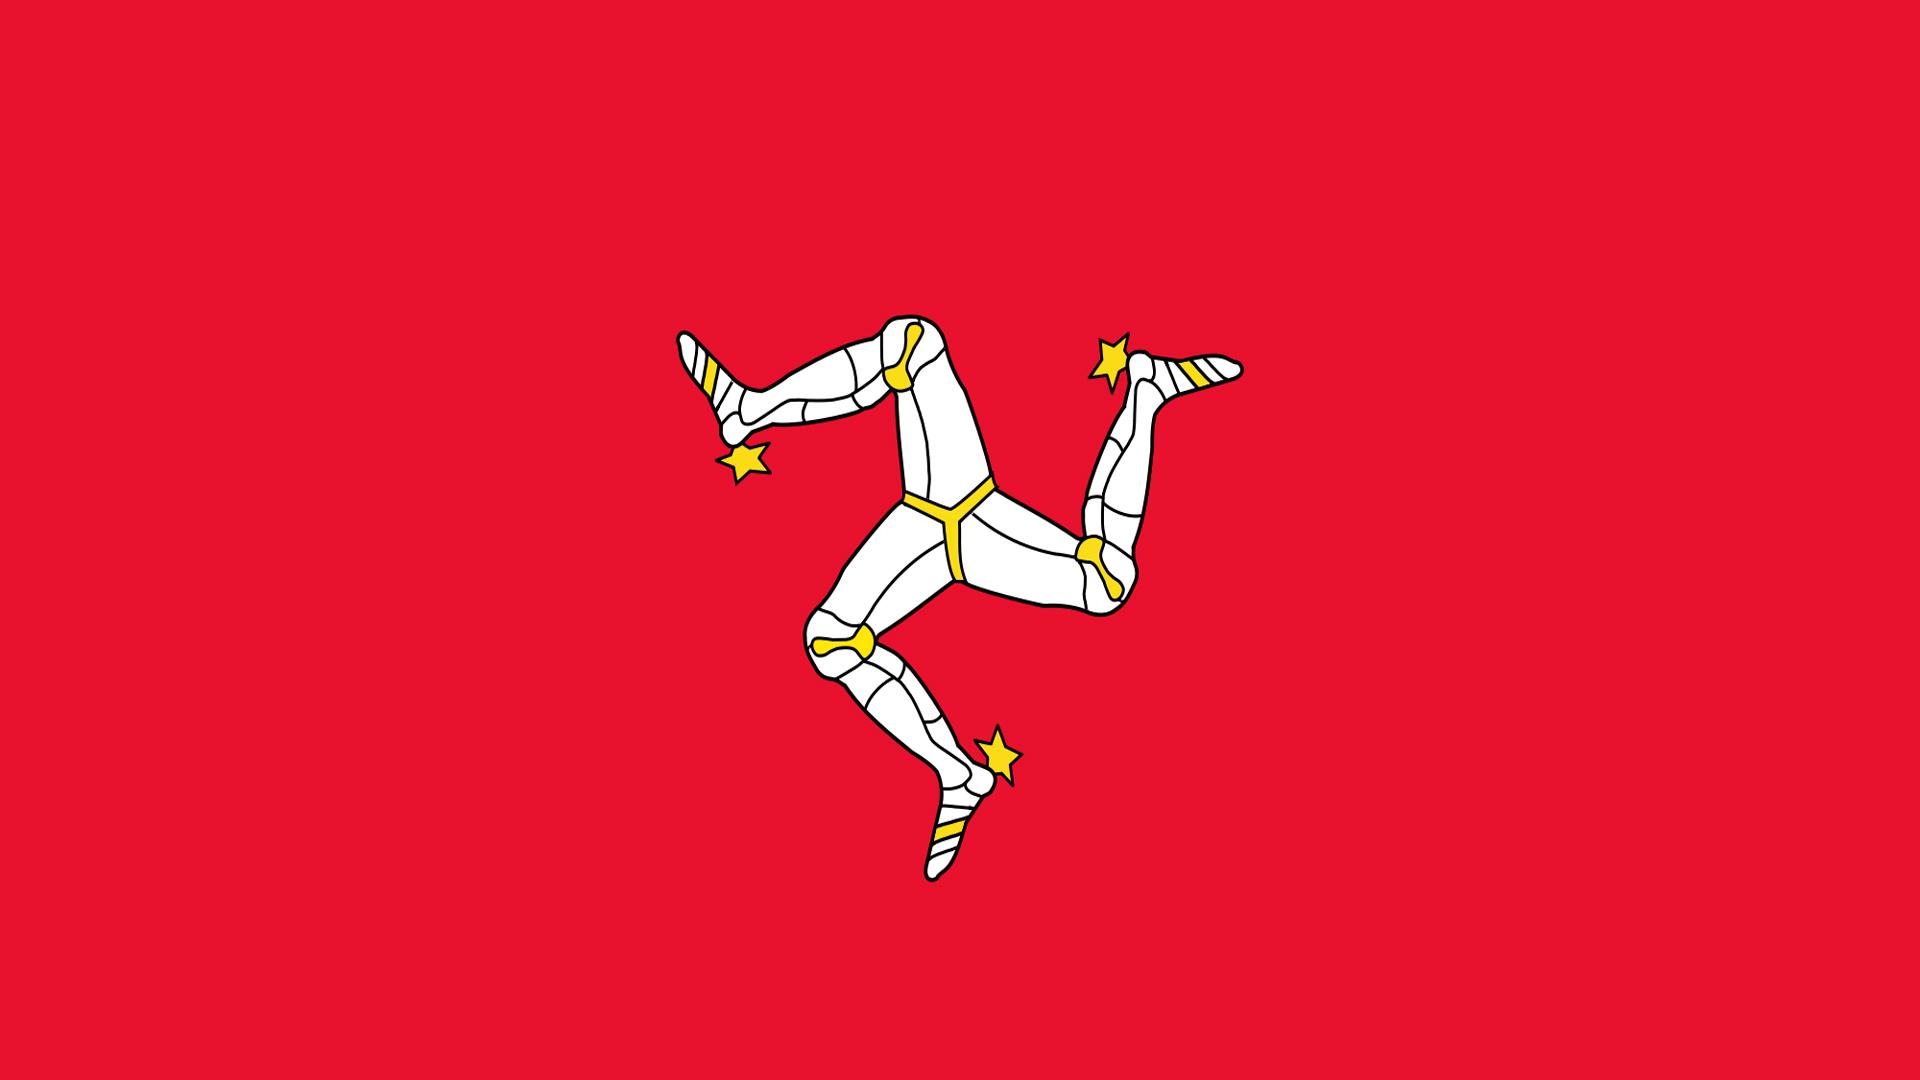 Isle of Man Flag, High Definition, High Quality, Widescreen